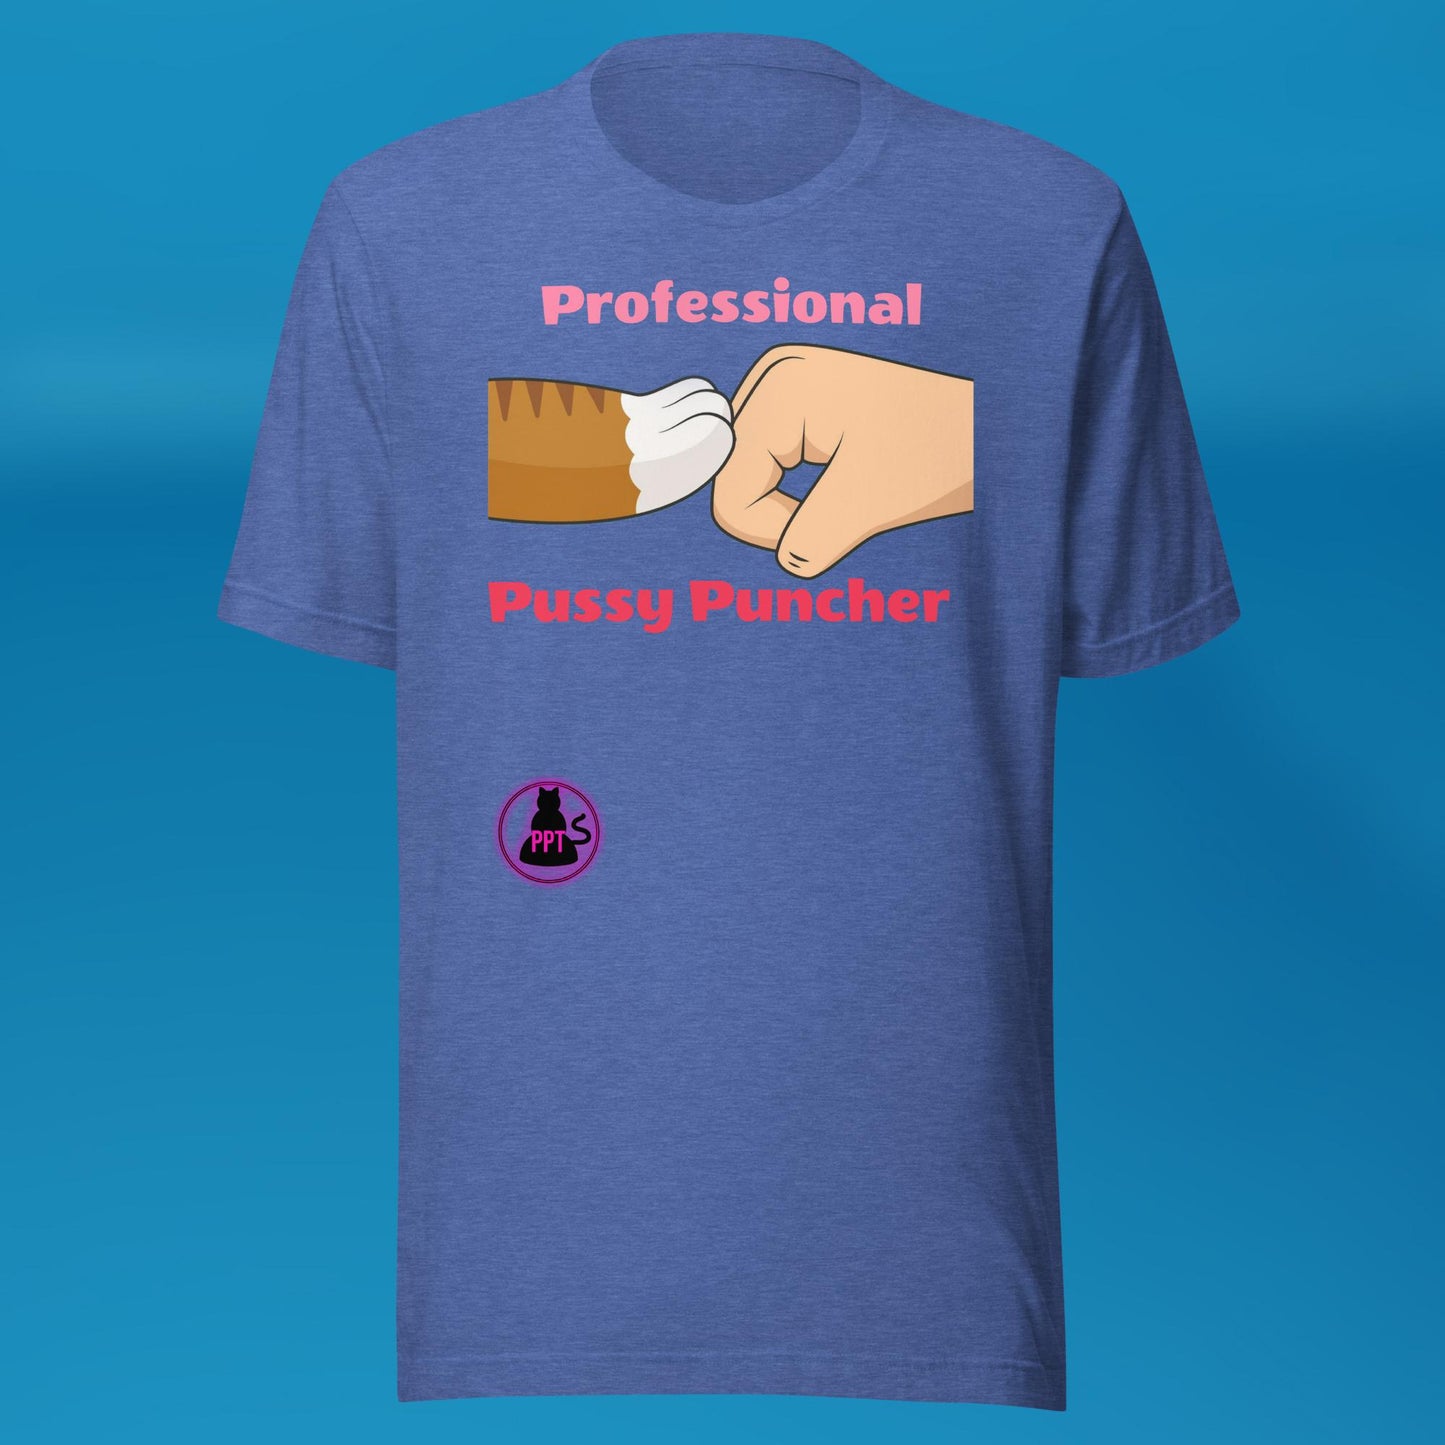 Pro Pussy Punch T